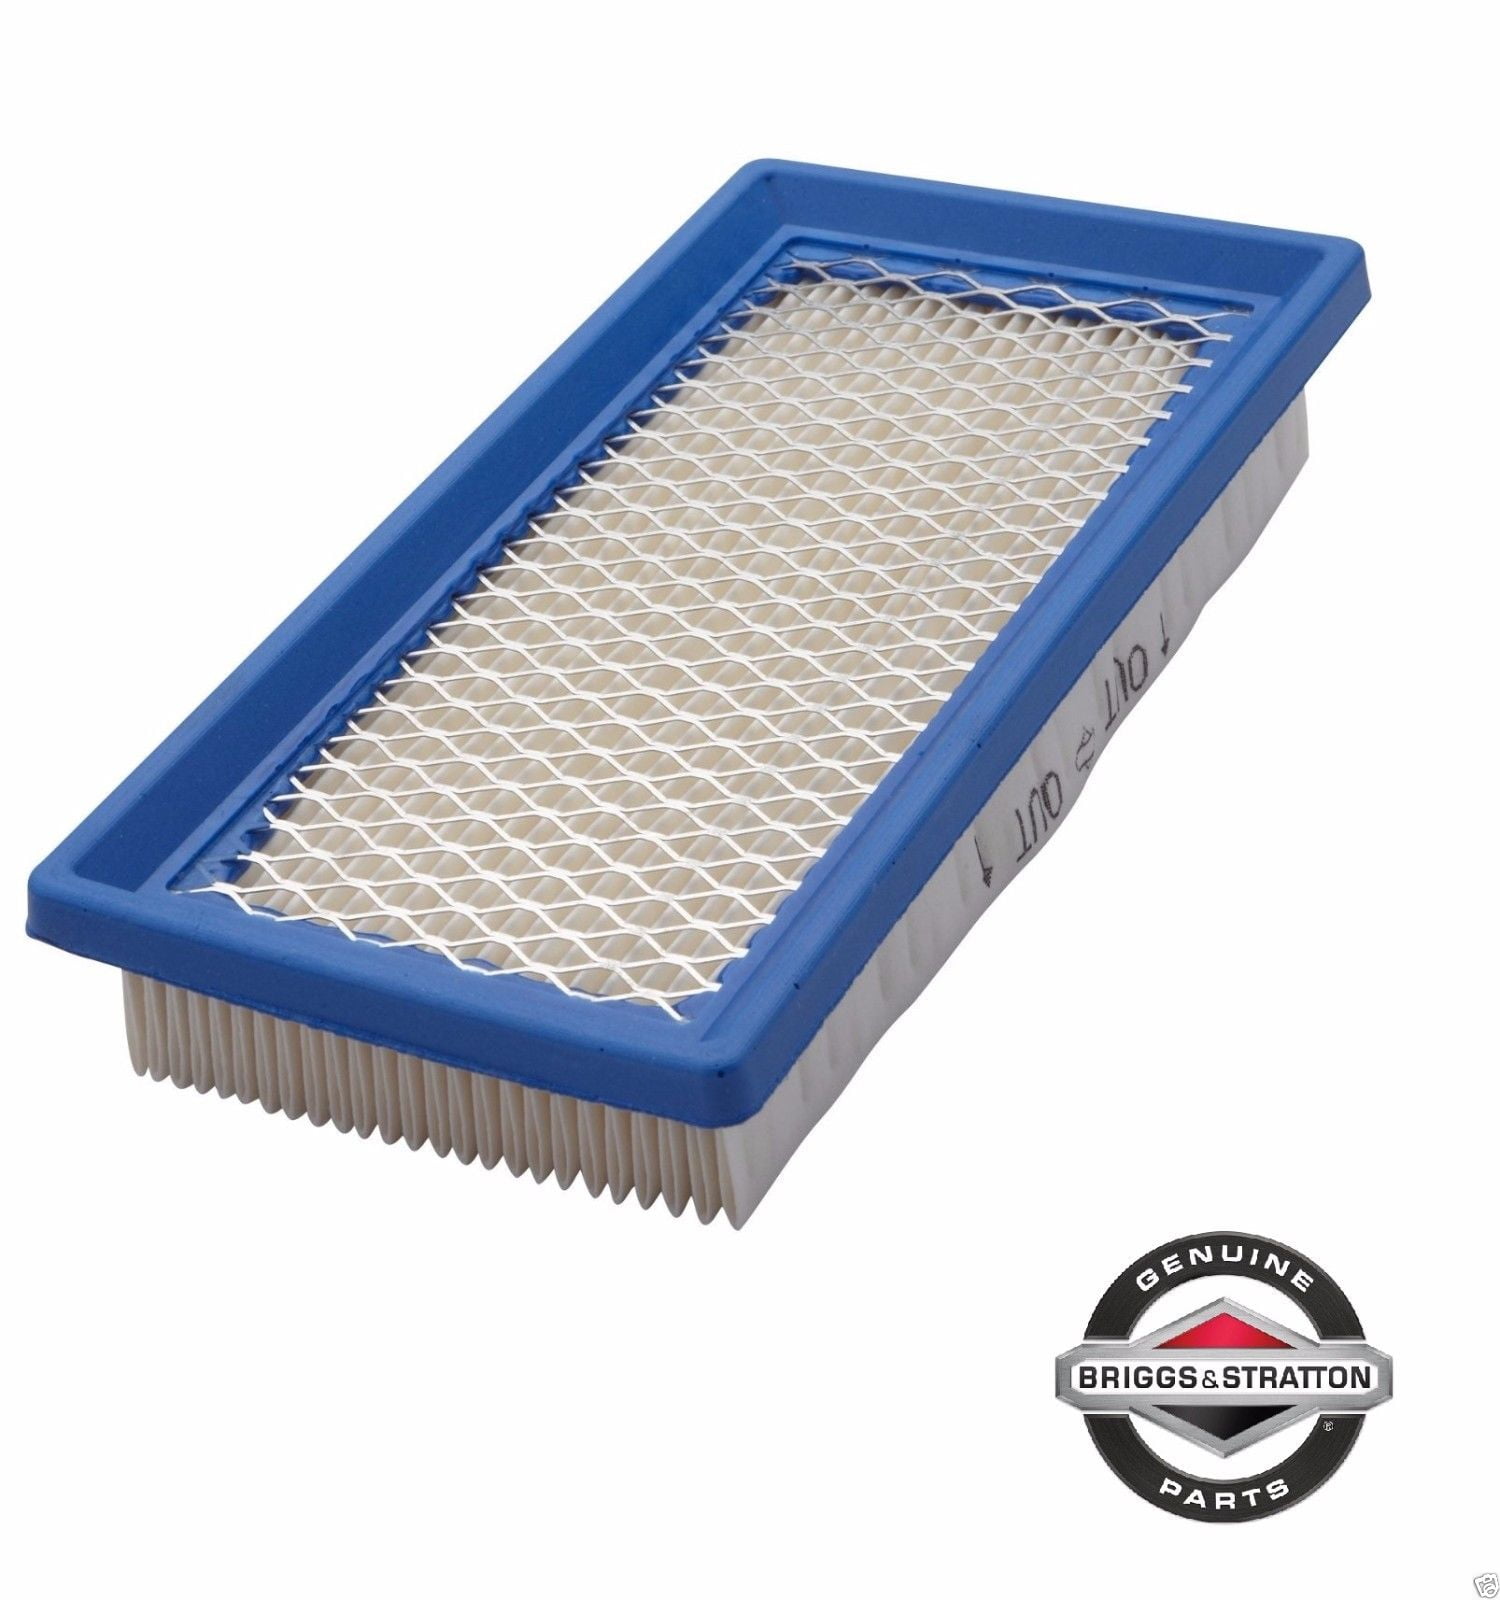 Air Filter For Honda G150 G200 Briggs & Stratton 494511 4145 494511S 93400 